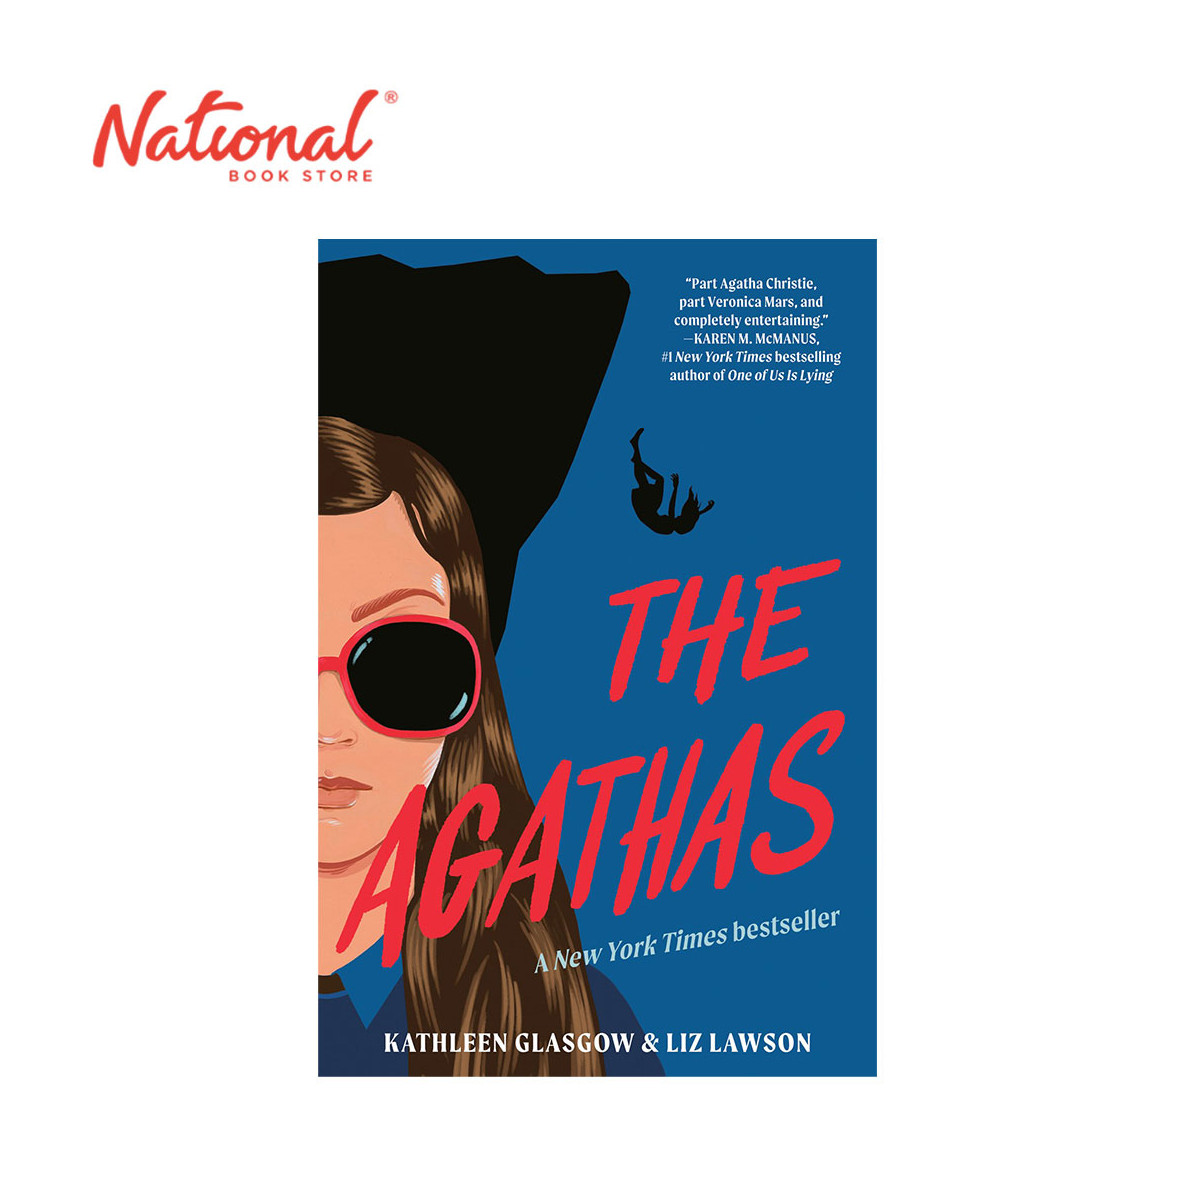 The Agathas by Kathleen Glasgow - Trade Paperback - Teens Fiction